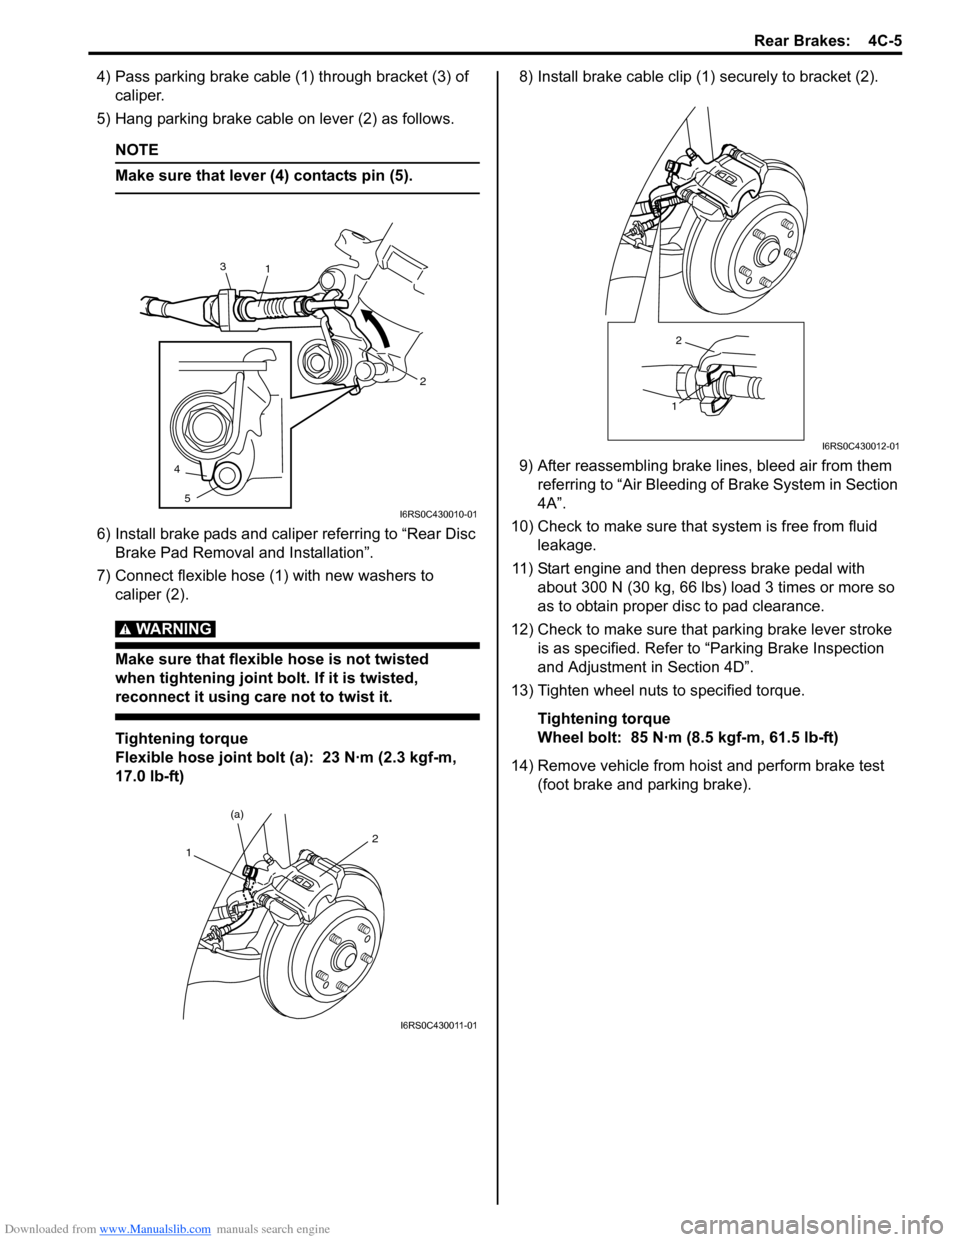 SUZUKI SWIFT 2007 2.G Service Workshop Manual Downloaded from www.Manualslib.com manuals search engine Rear Brakes:  4C-5
4) Pass parking brake cable (1) through bracket (3) of caliper.
5) Hang parking brake cable on lever (2) as follows.
NOTE
Ma